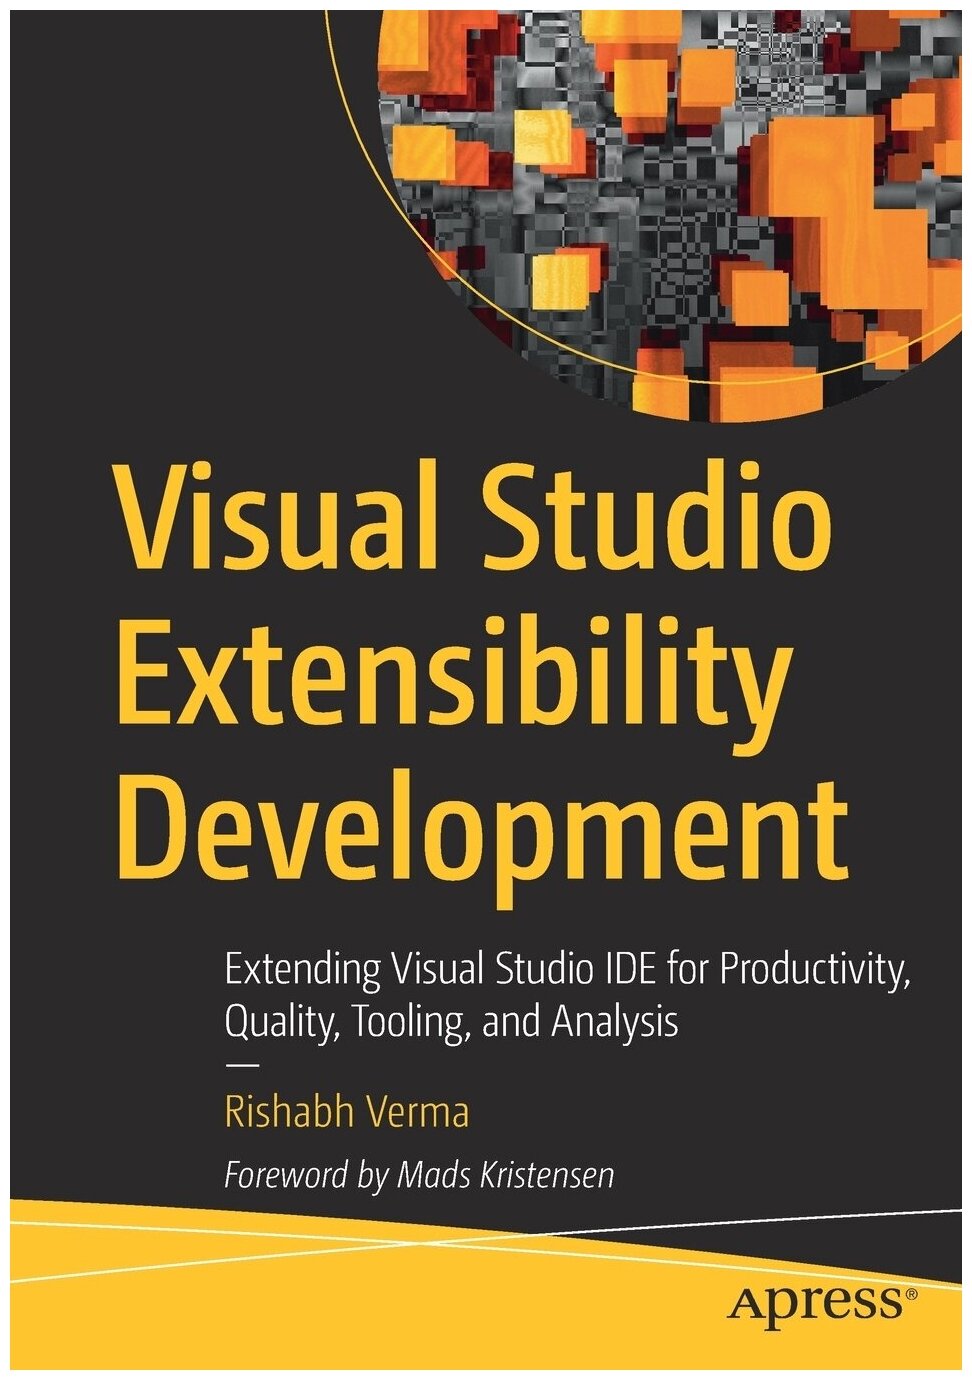 Visual Studio Extensibility Development. Extending Visual Studio IDE for Productivity, Quality, Tooling, and Analysis